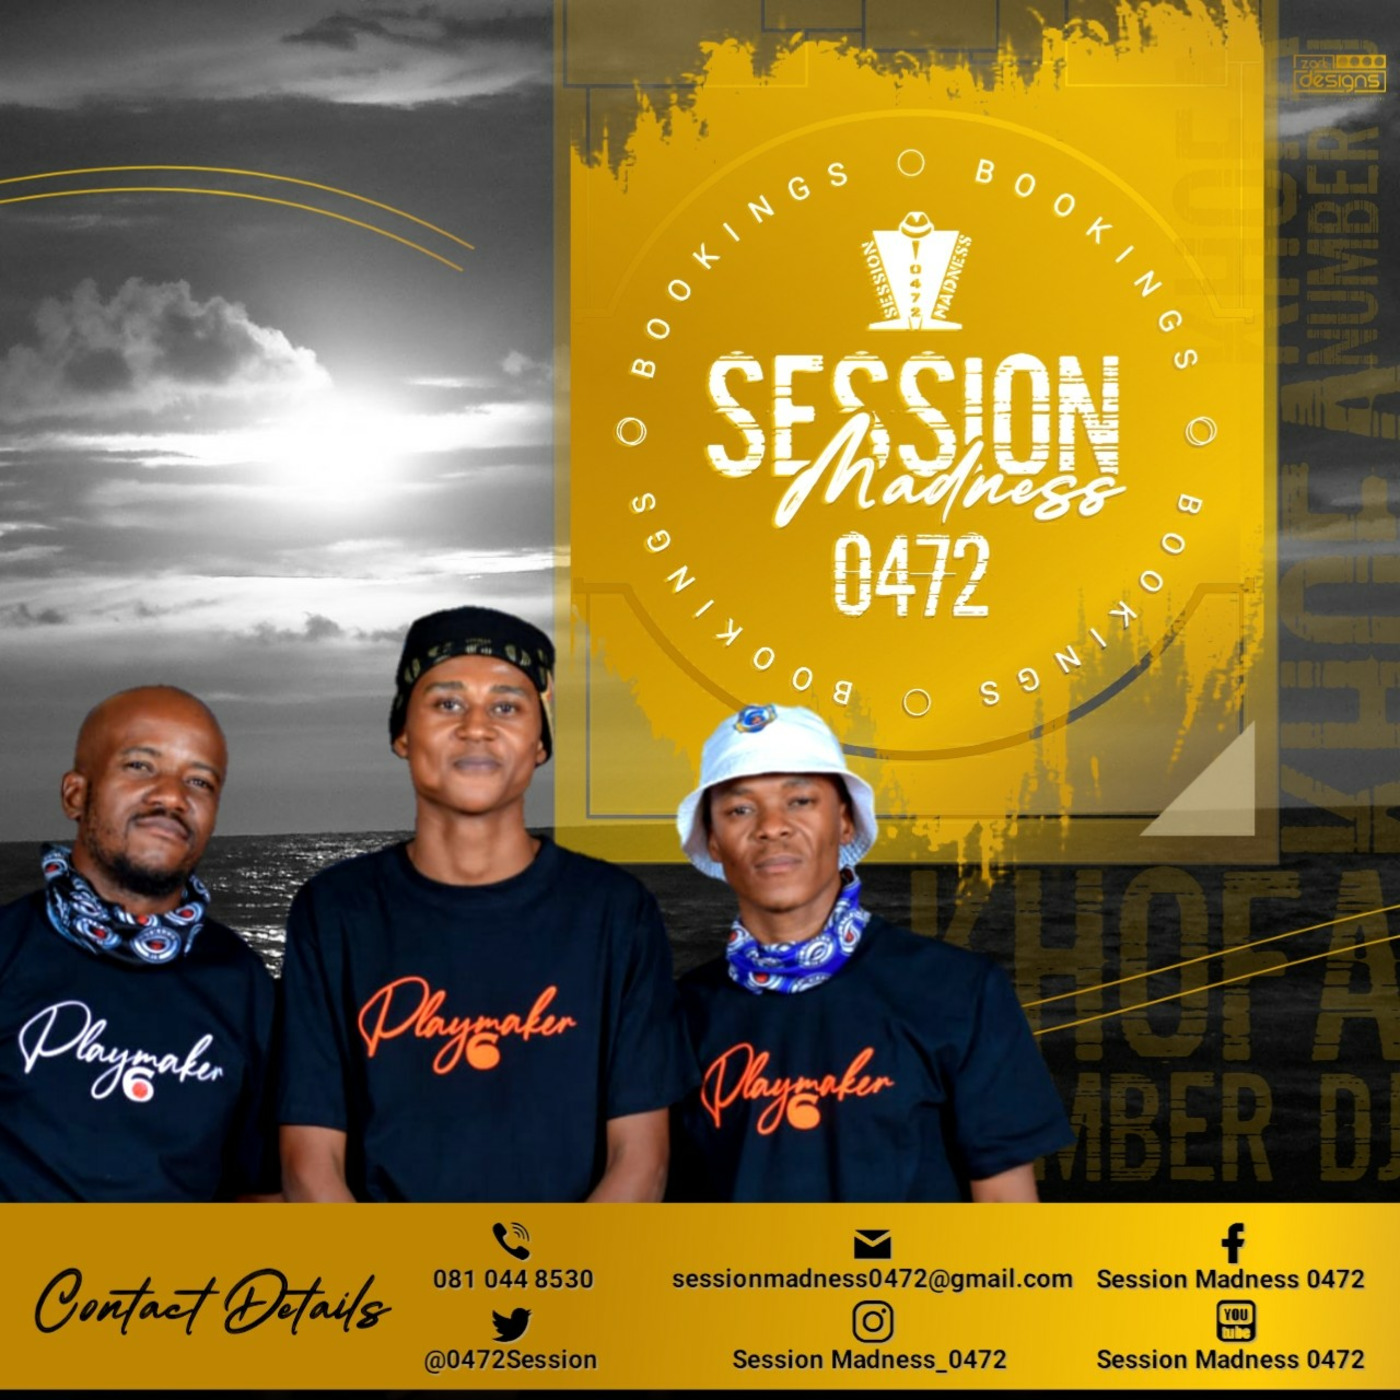 Session Madness 0472 52nd (Birthday Mix) Episode Blessed By Ell Pee & Charity